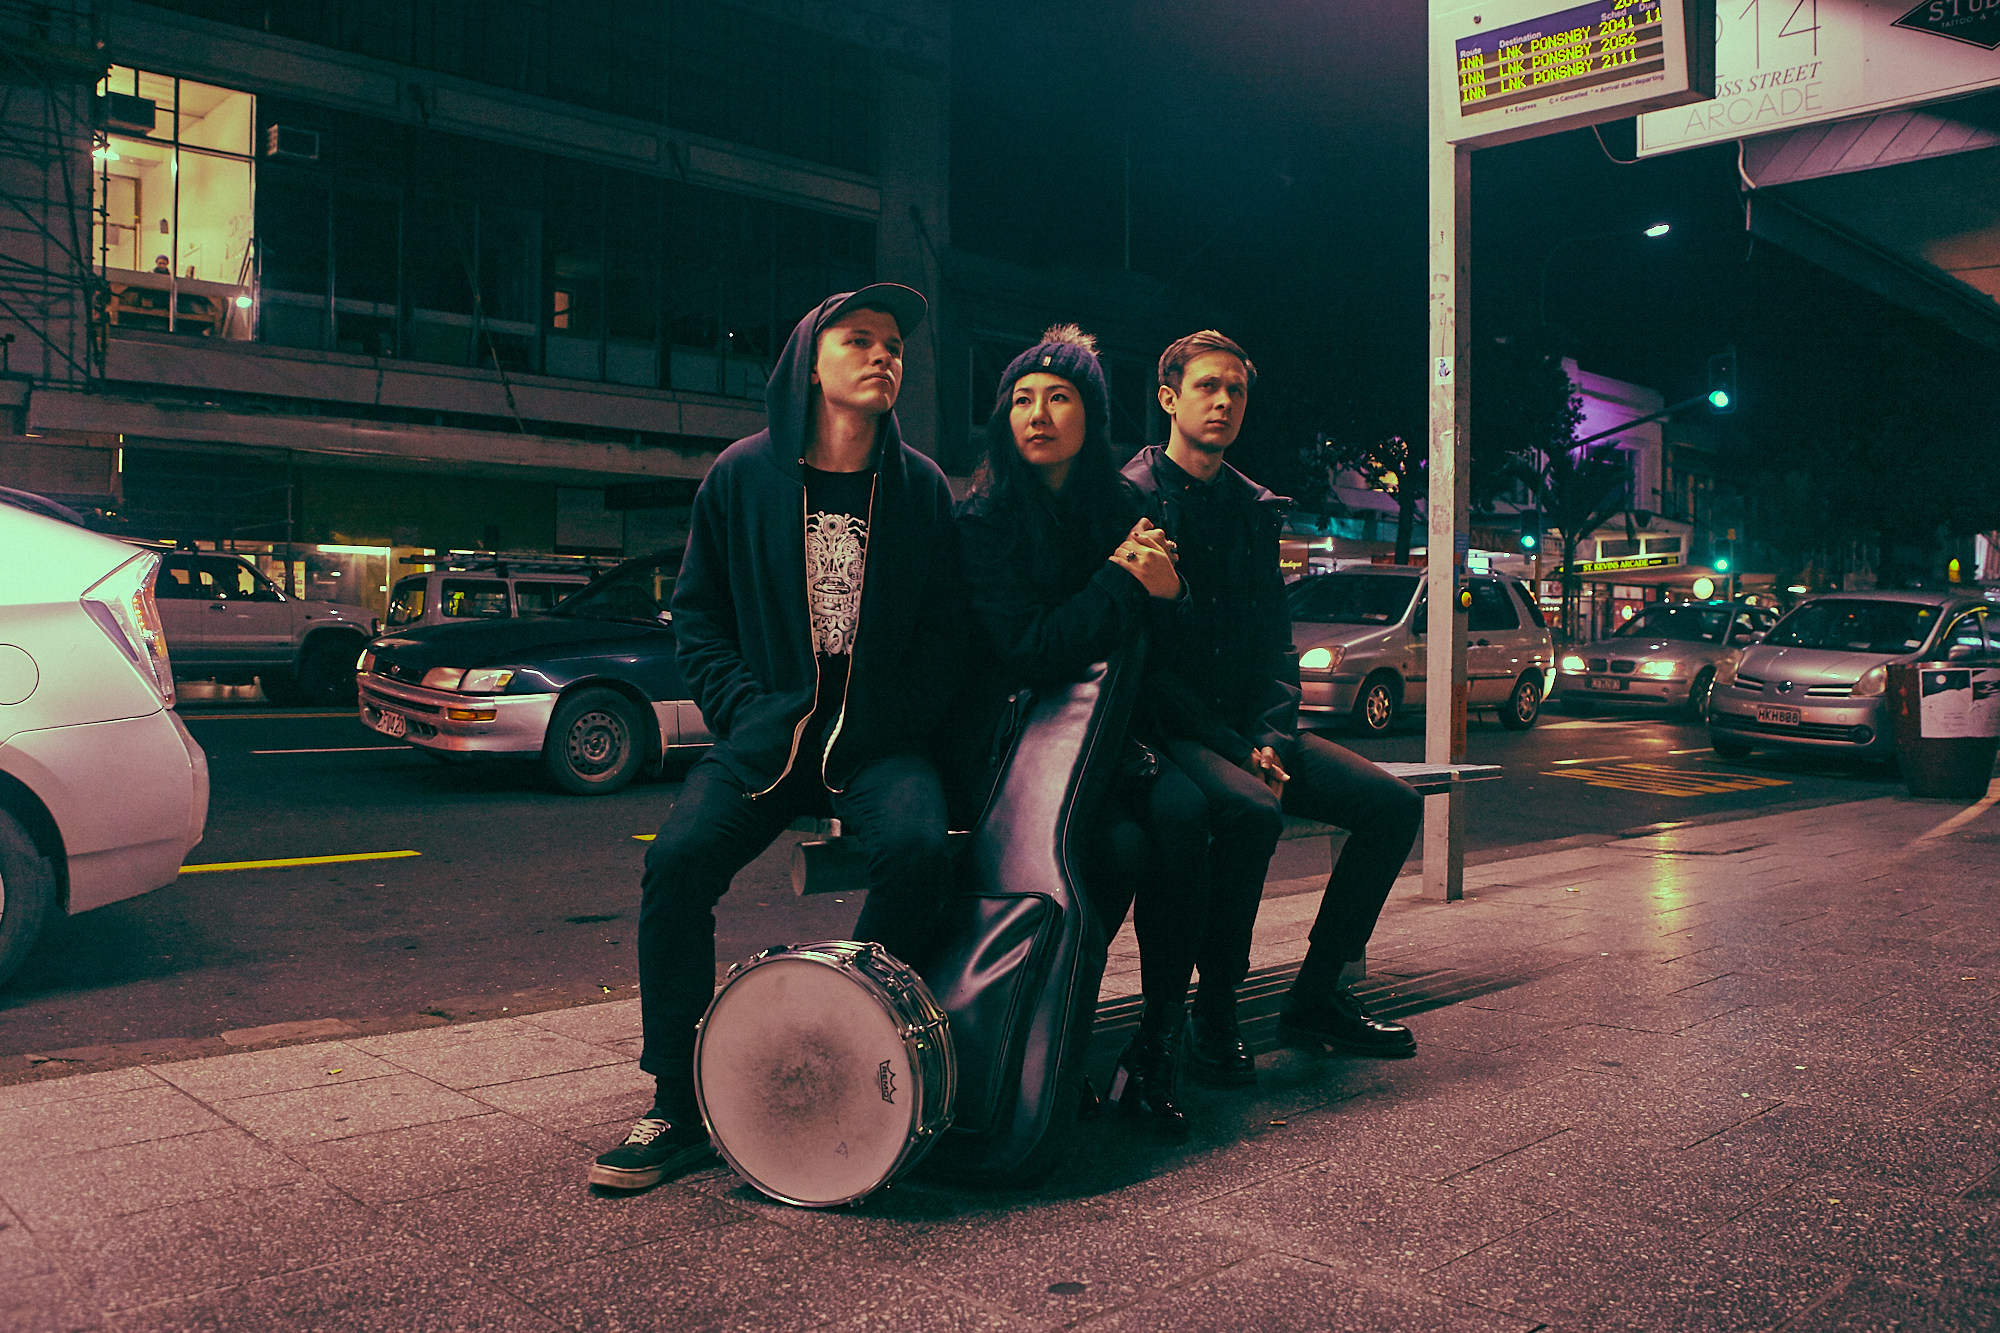 "Stay Disappointed" by Wax Chattels is Northern Transmissions' 'Song of the Day'